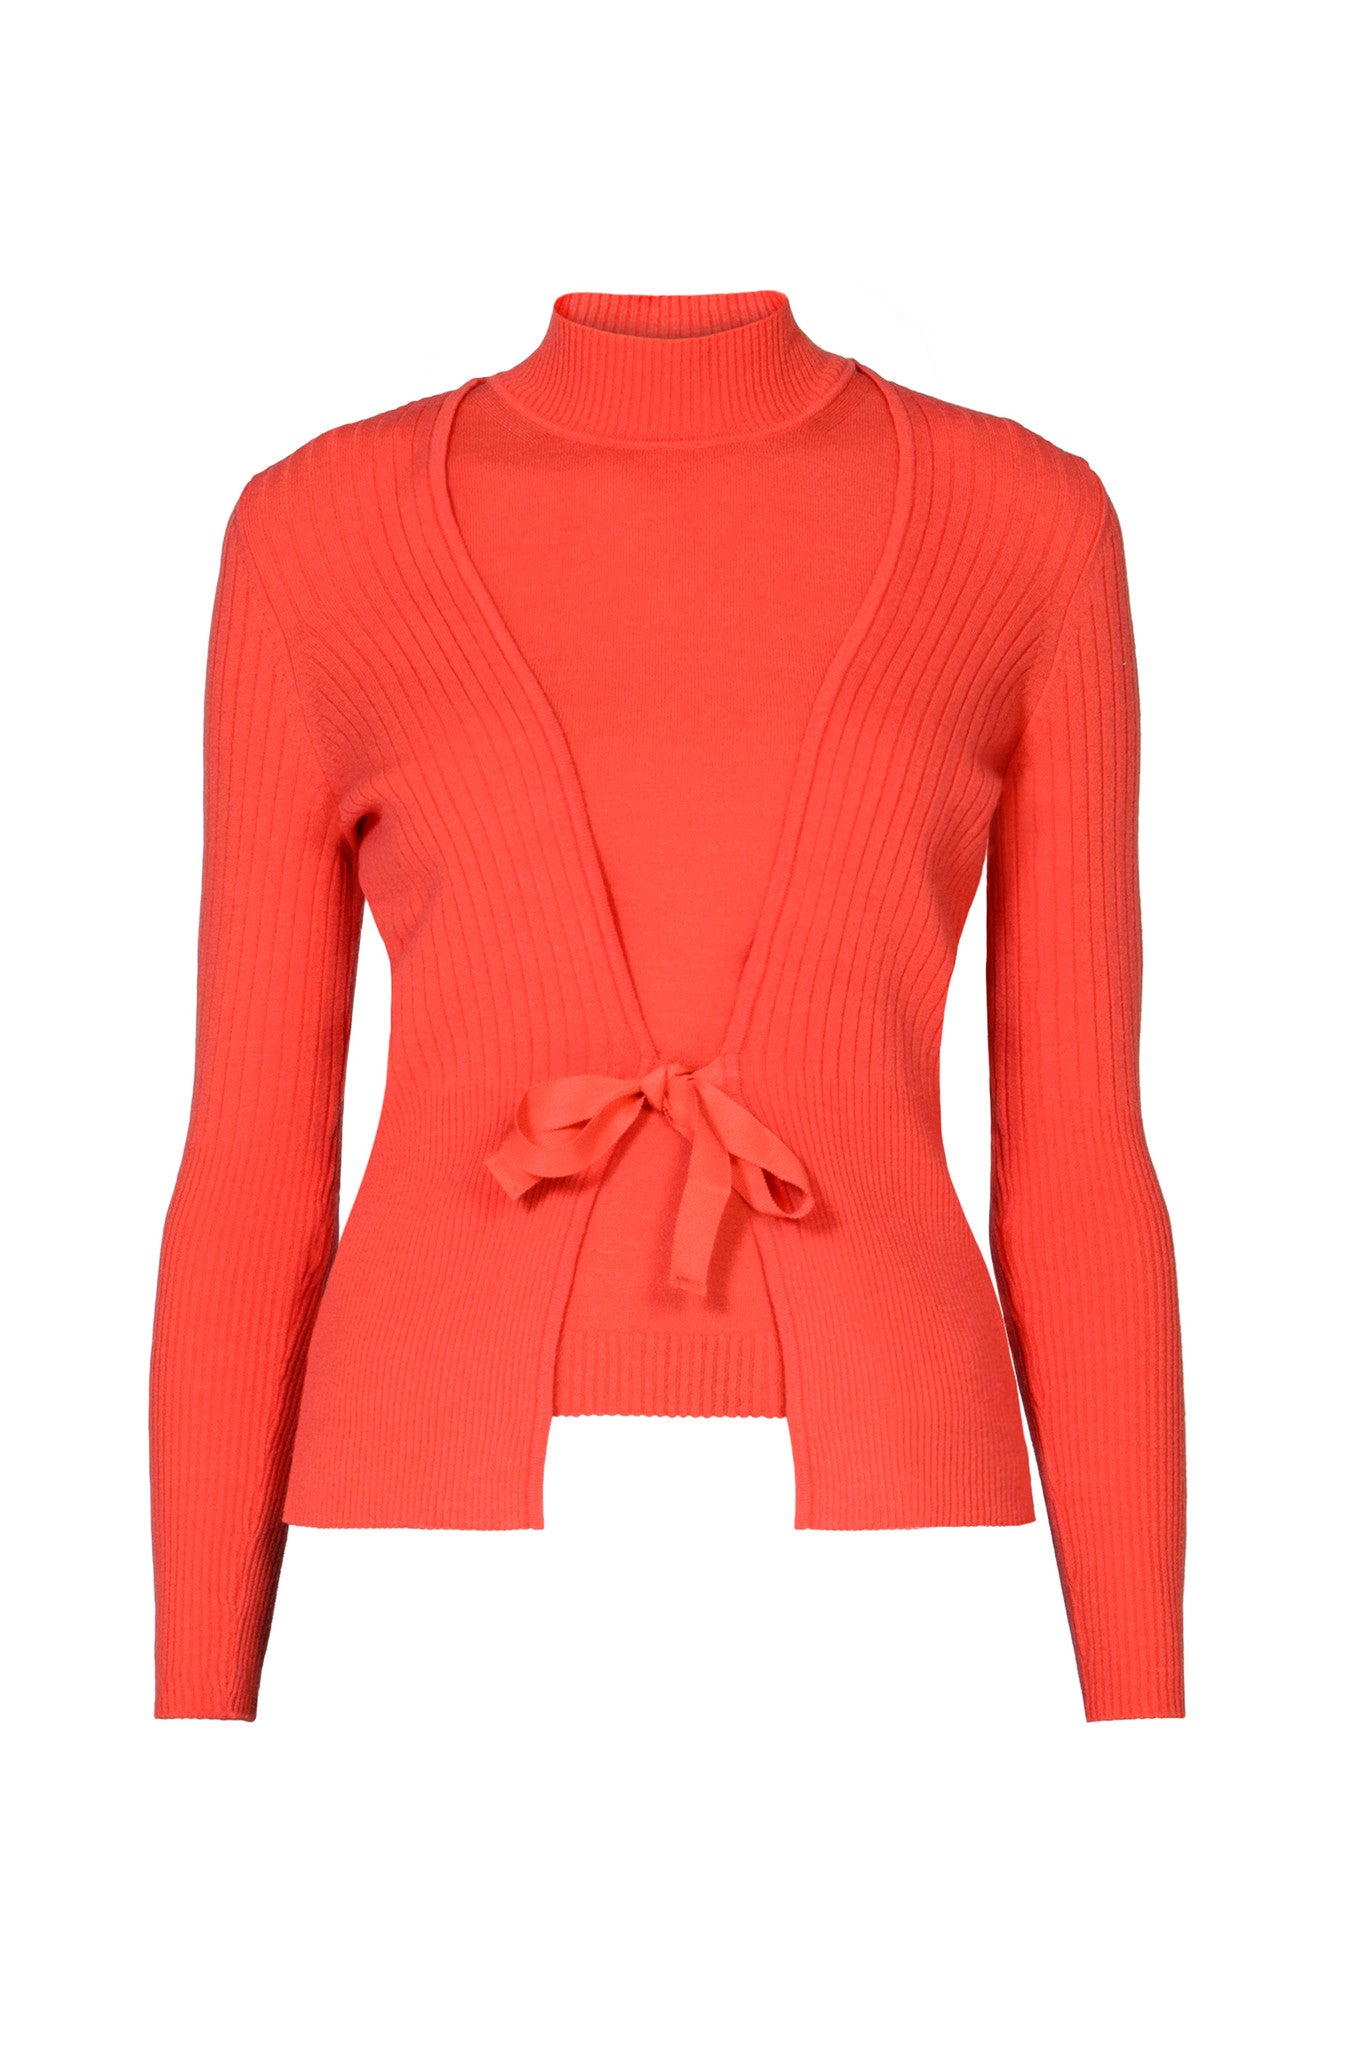 Wool cardigan and sleeveless top in persimmon